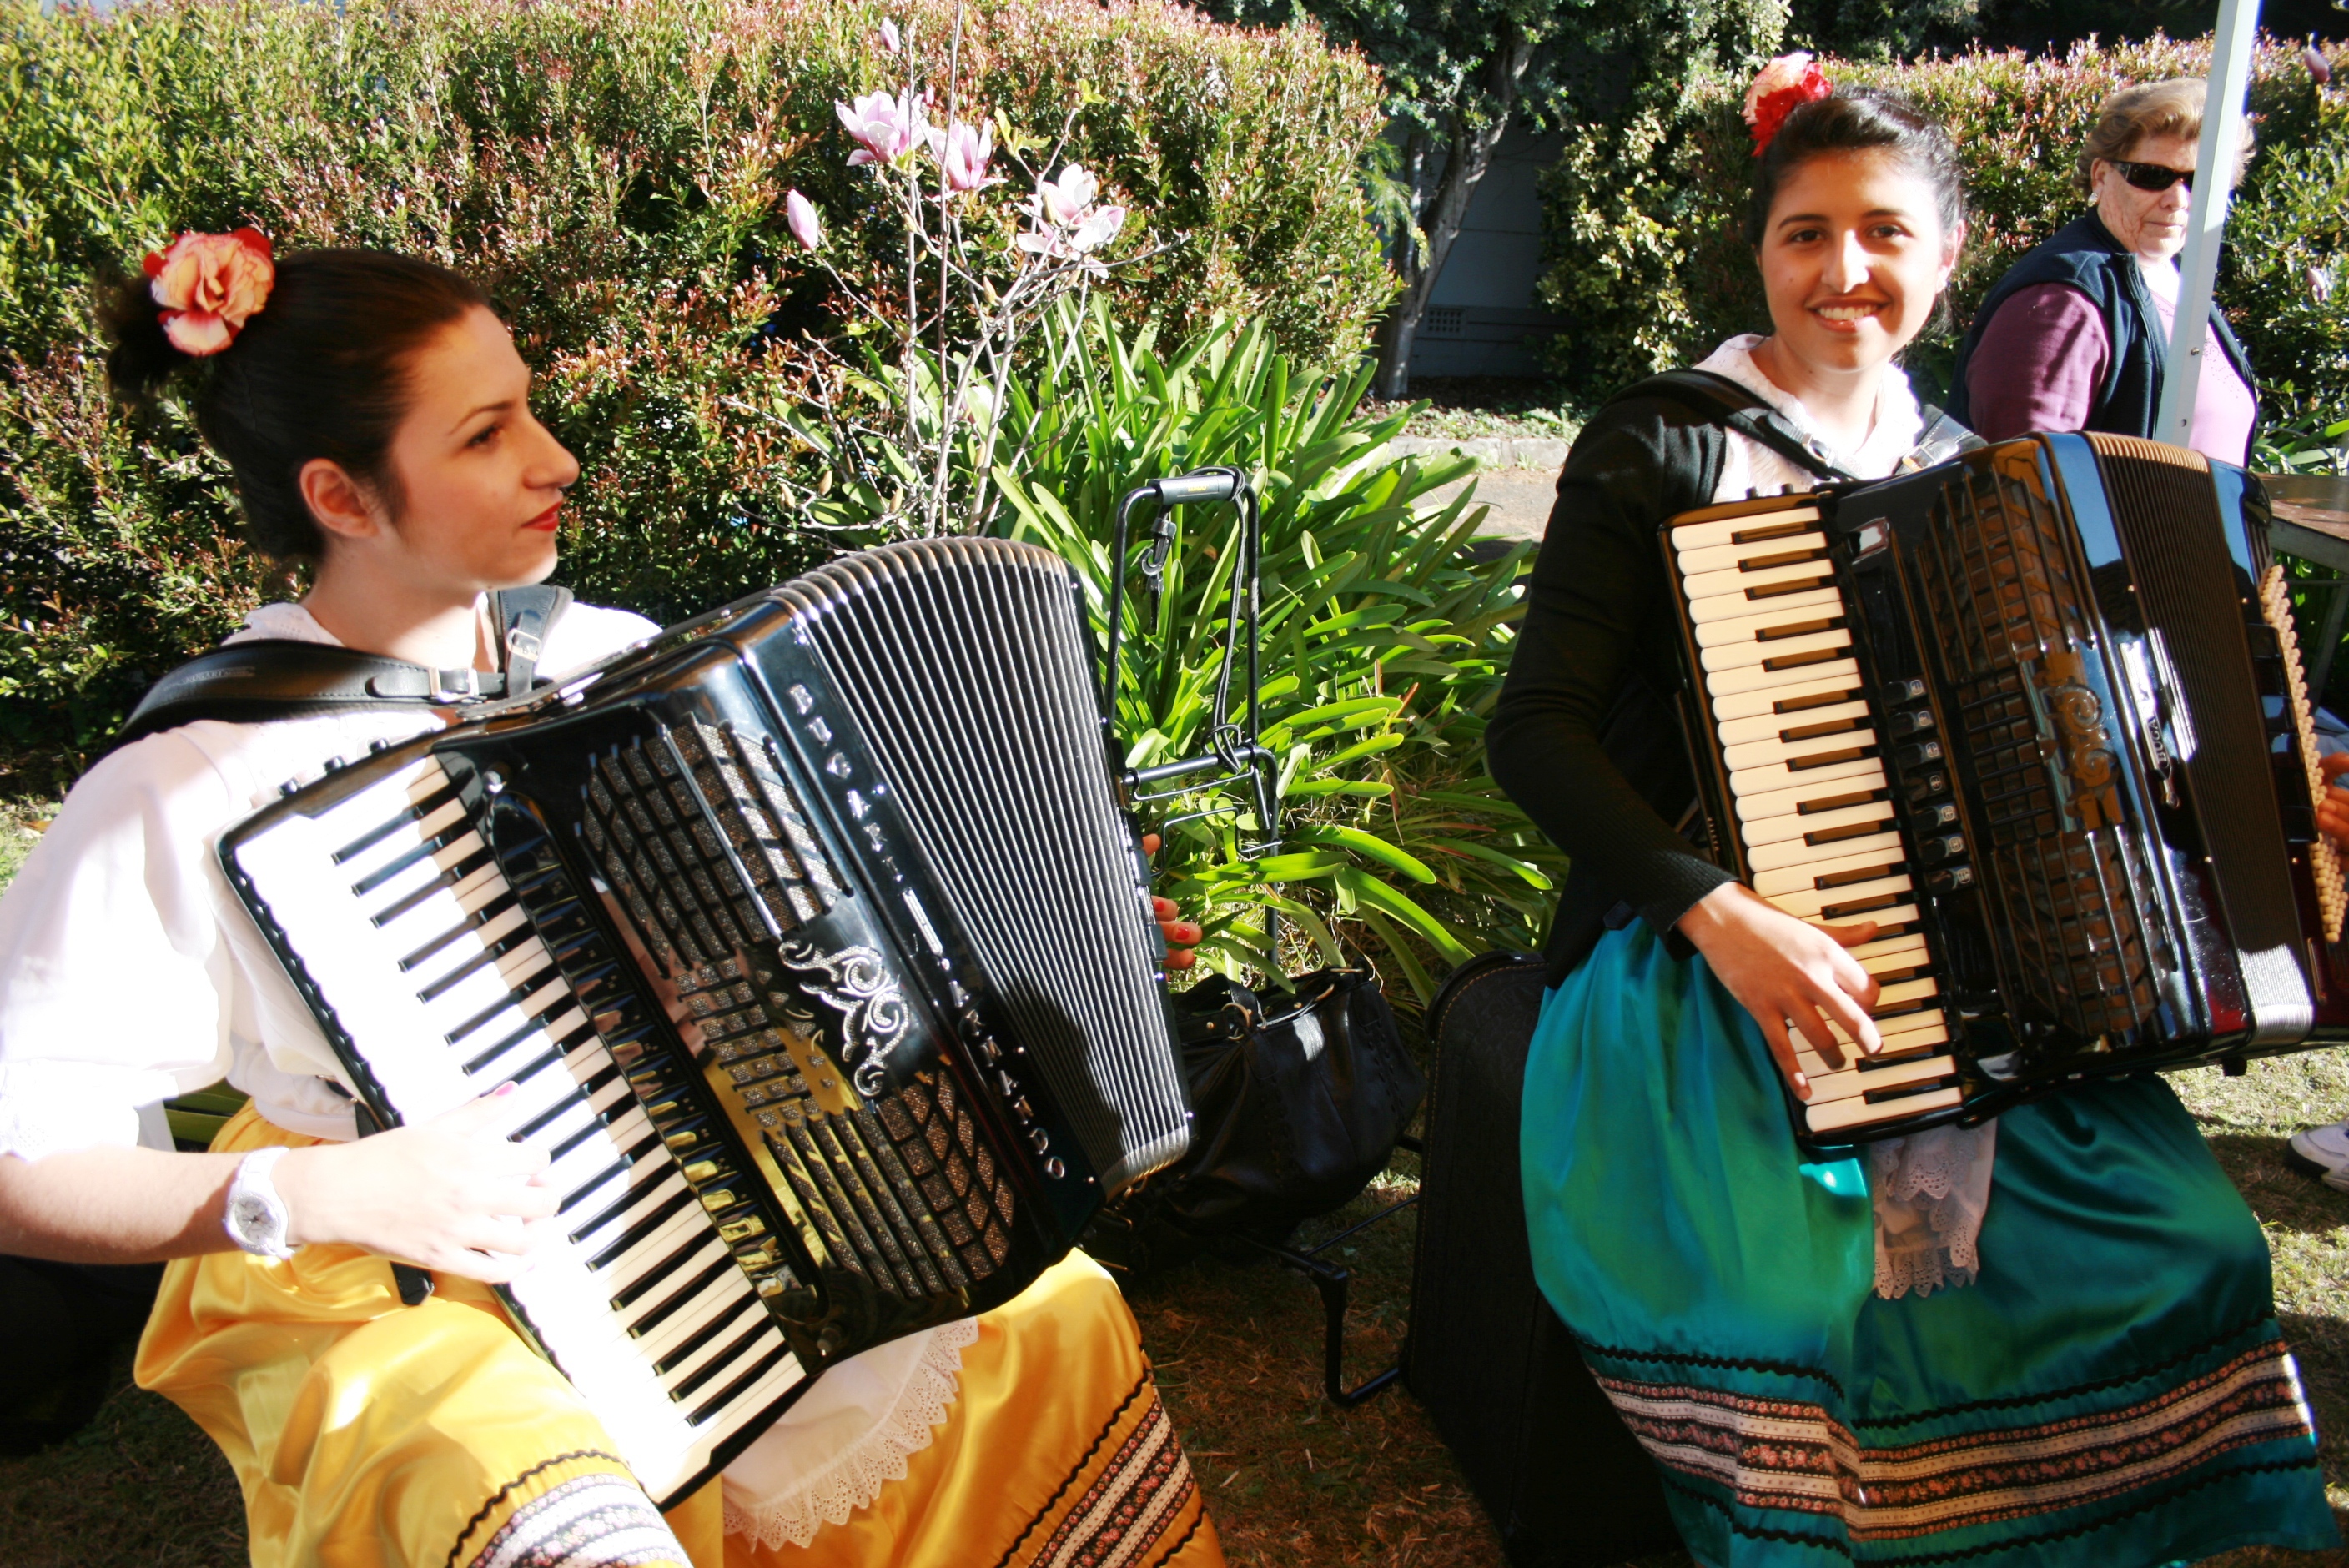 Performers playing the accordian